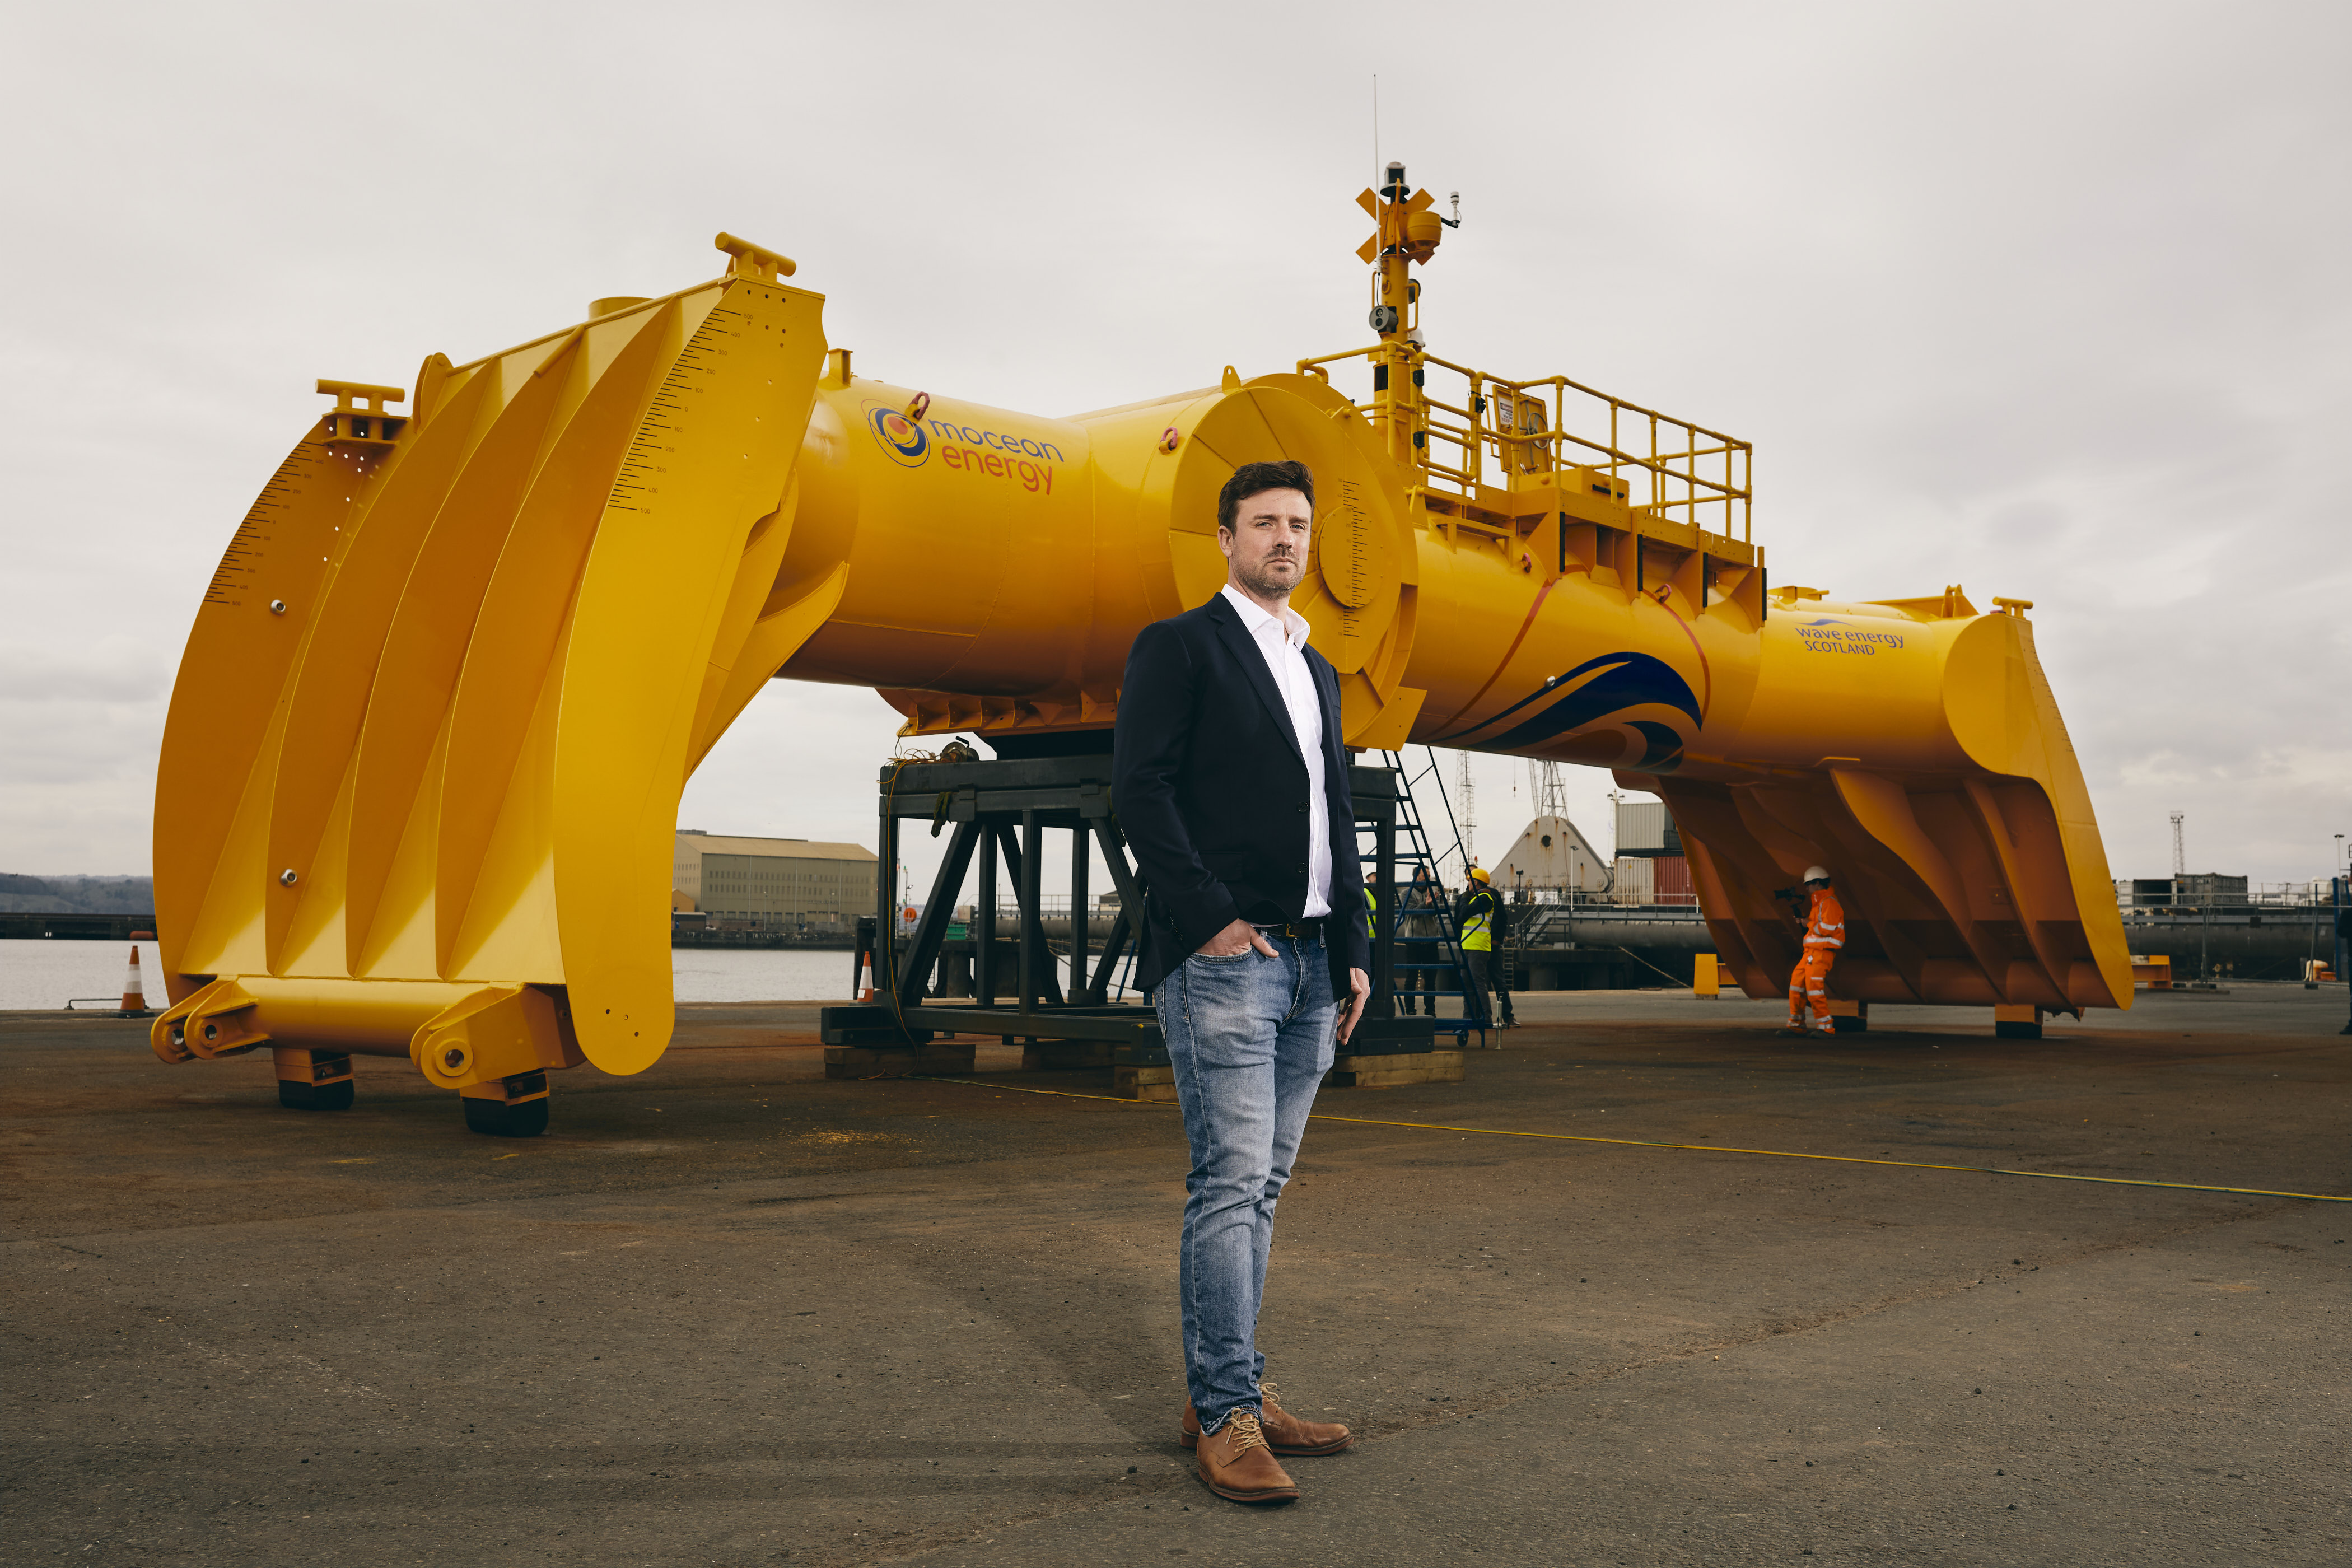 Mocean Energy lands £730,000 new funding to accelerate commercialisation plans